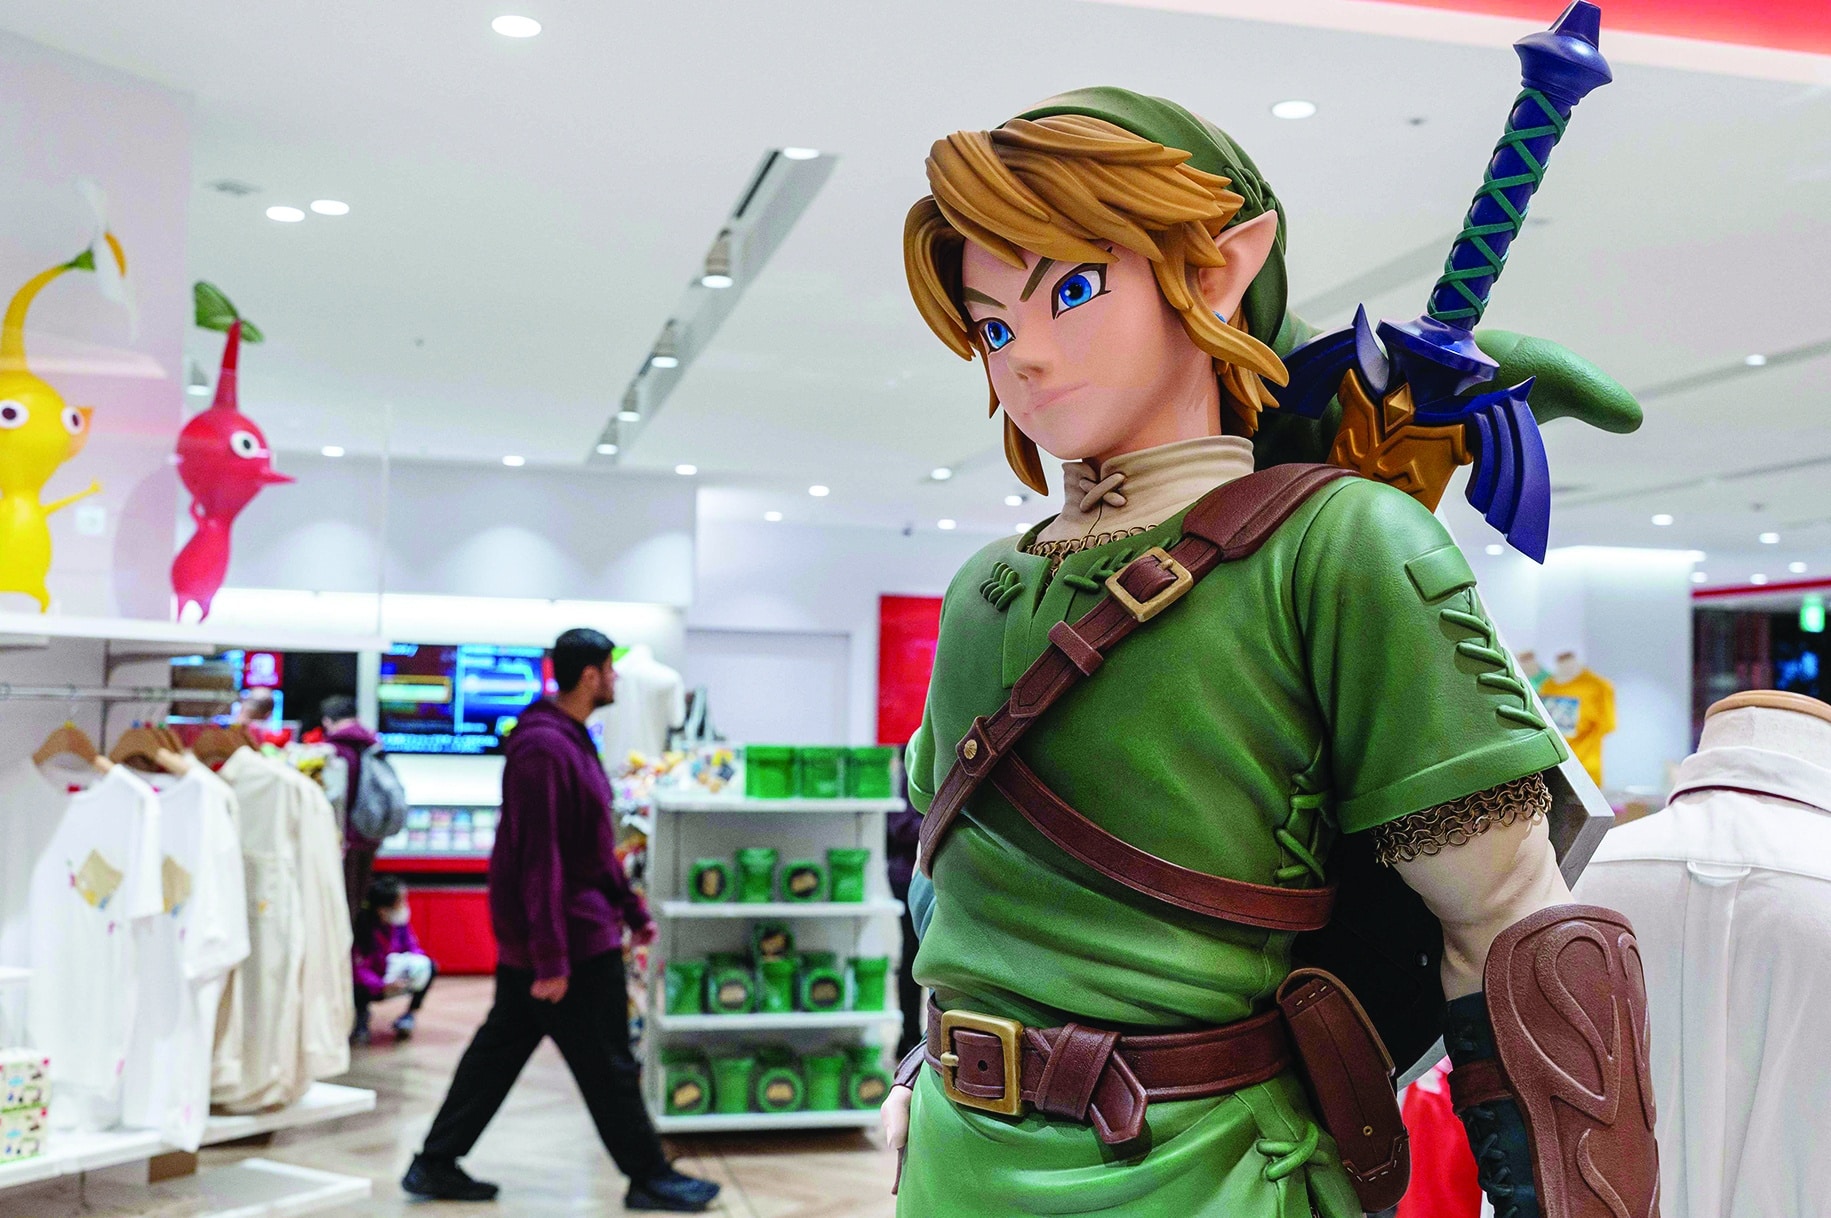 A display (right) for Japanese gaming giant Nintendo's long-running 'Legend of Zelda' game series, at the company's official store in Tokyo's Shibuya district.